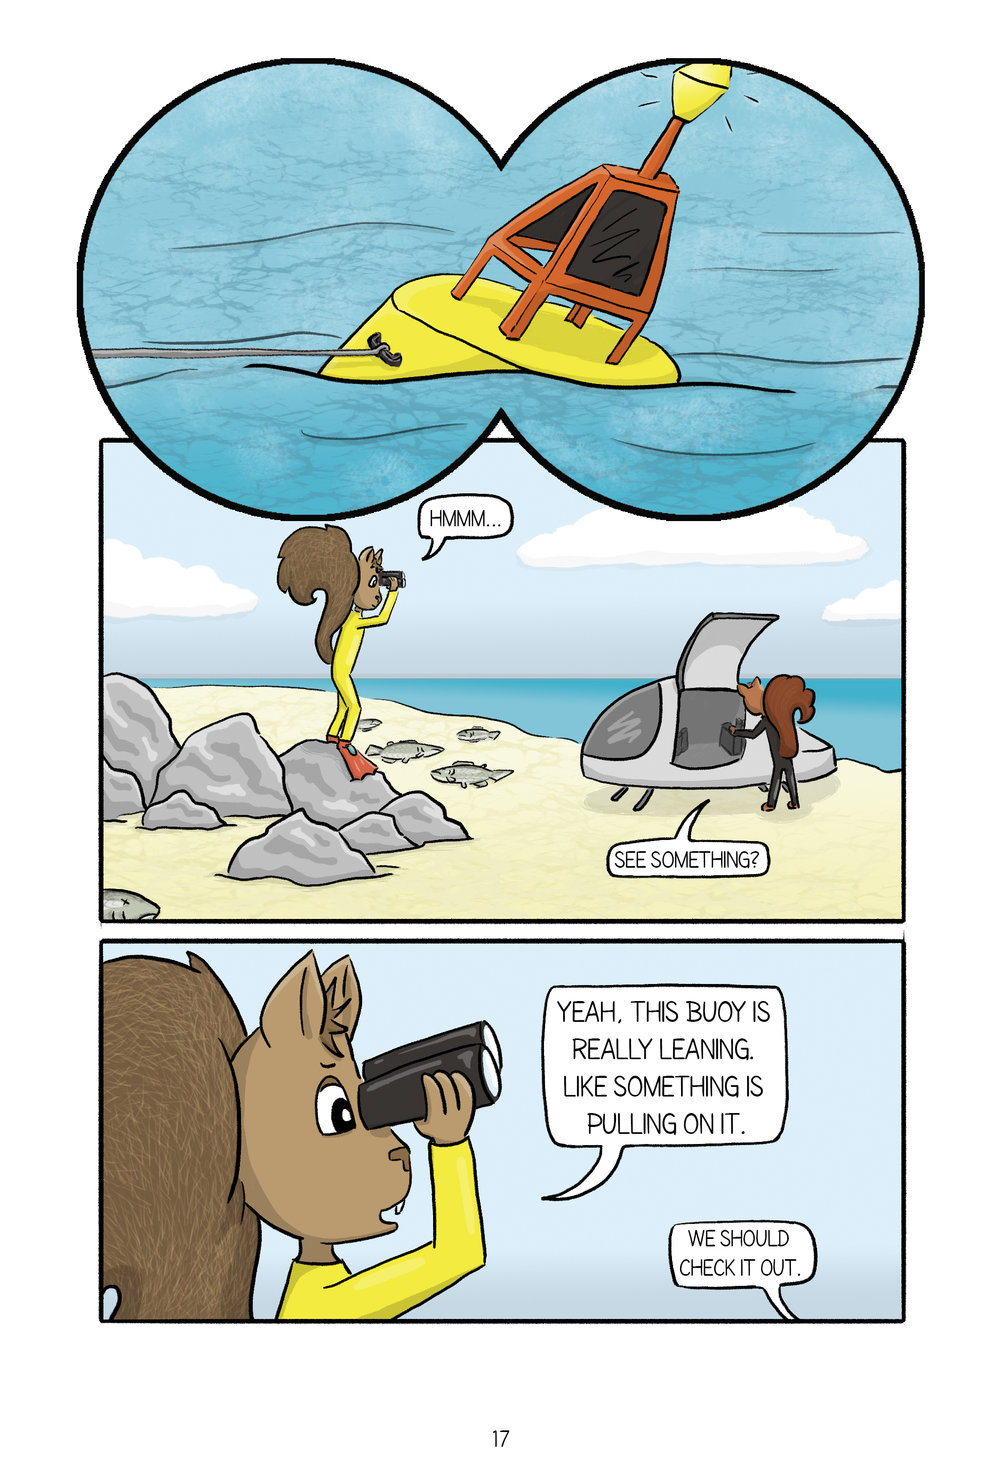 Page 17 Cognito sees a buoy that is leaning like something is pulling on it